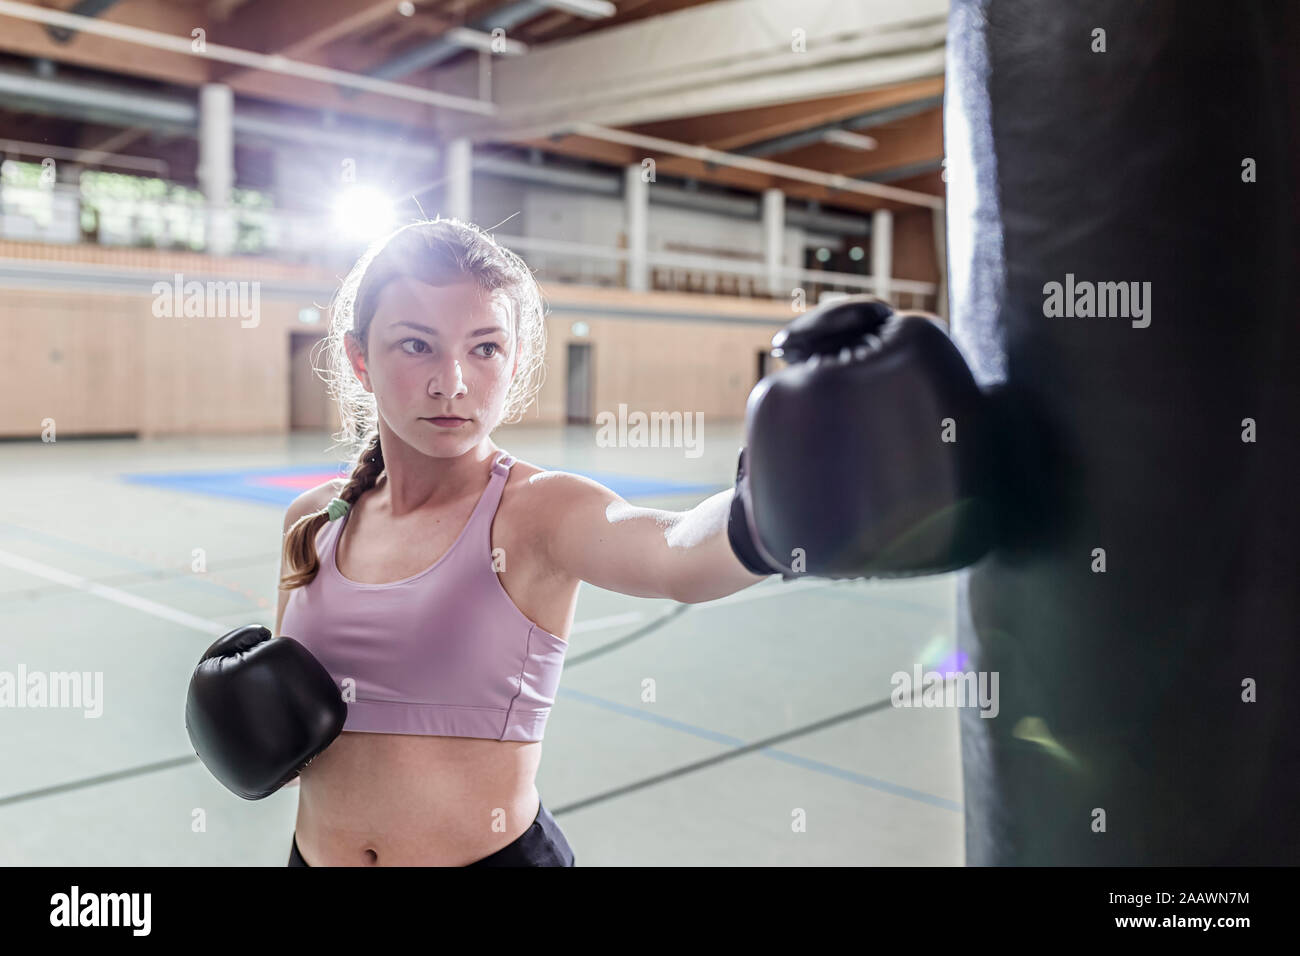 Female boxer practising at punchbag in sports hall Stock Photo